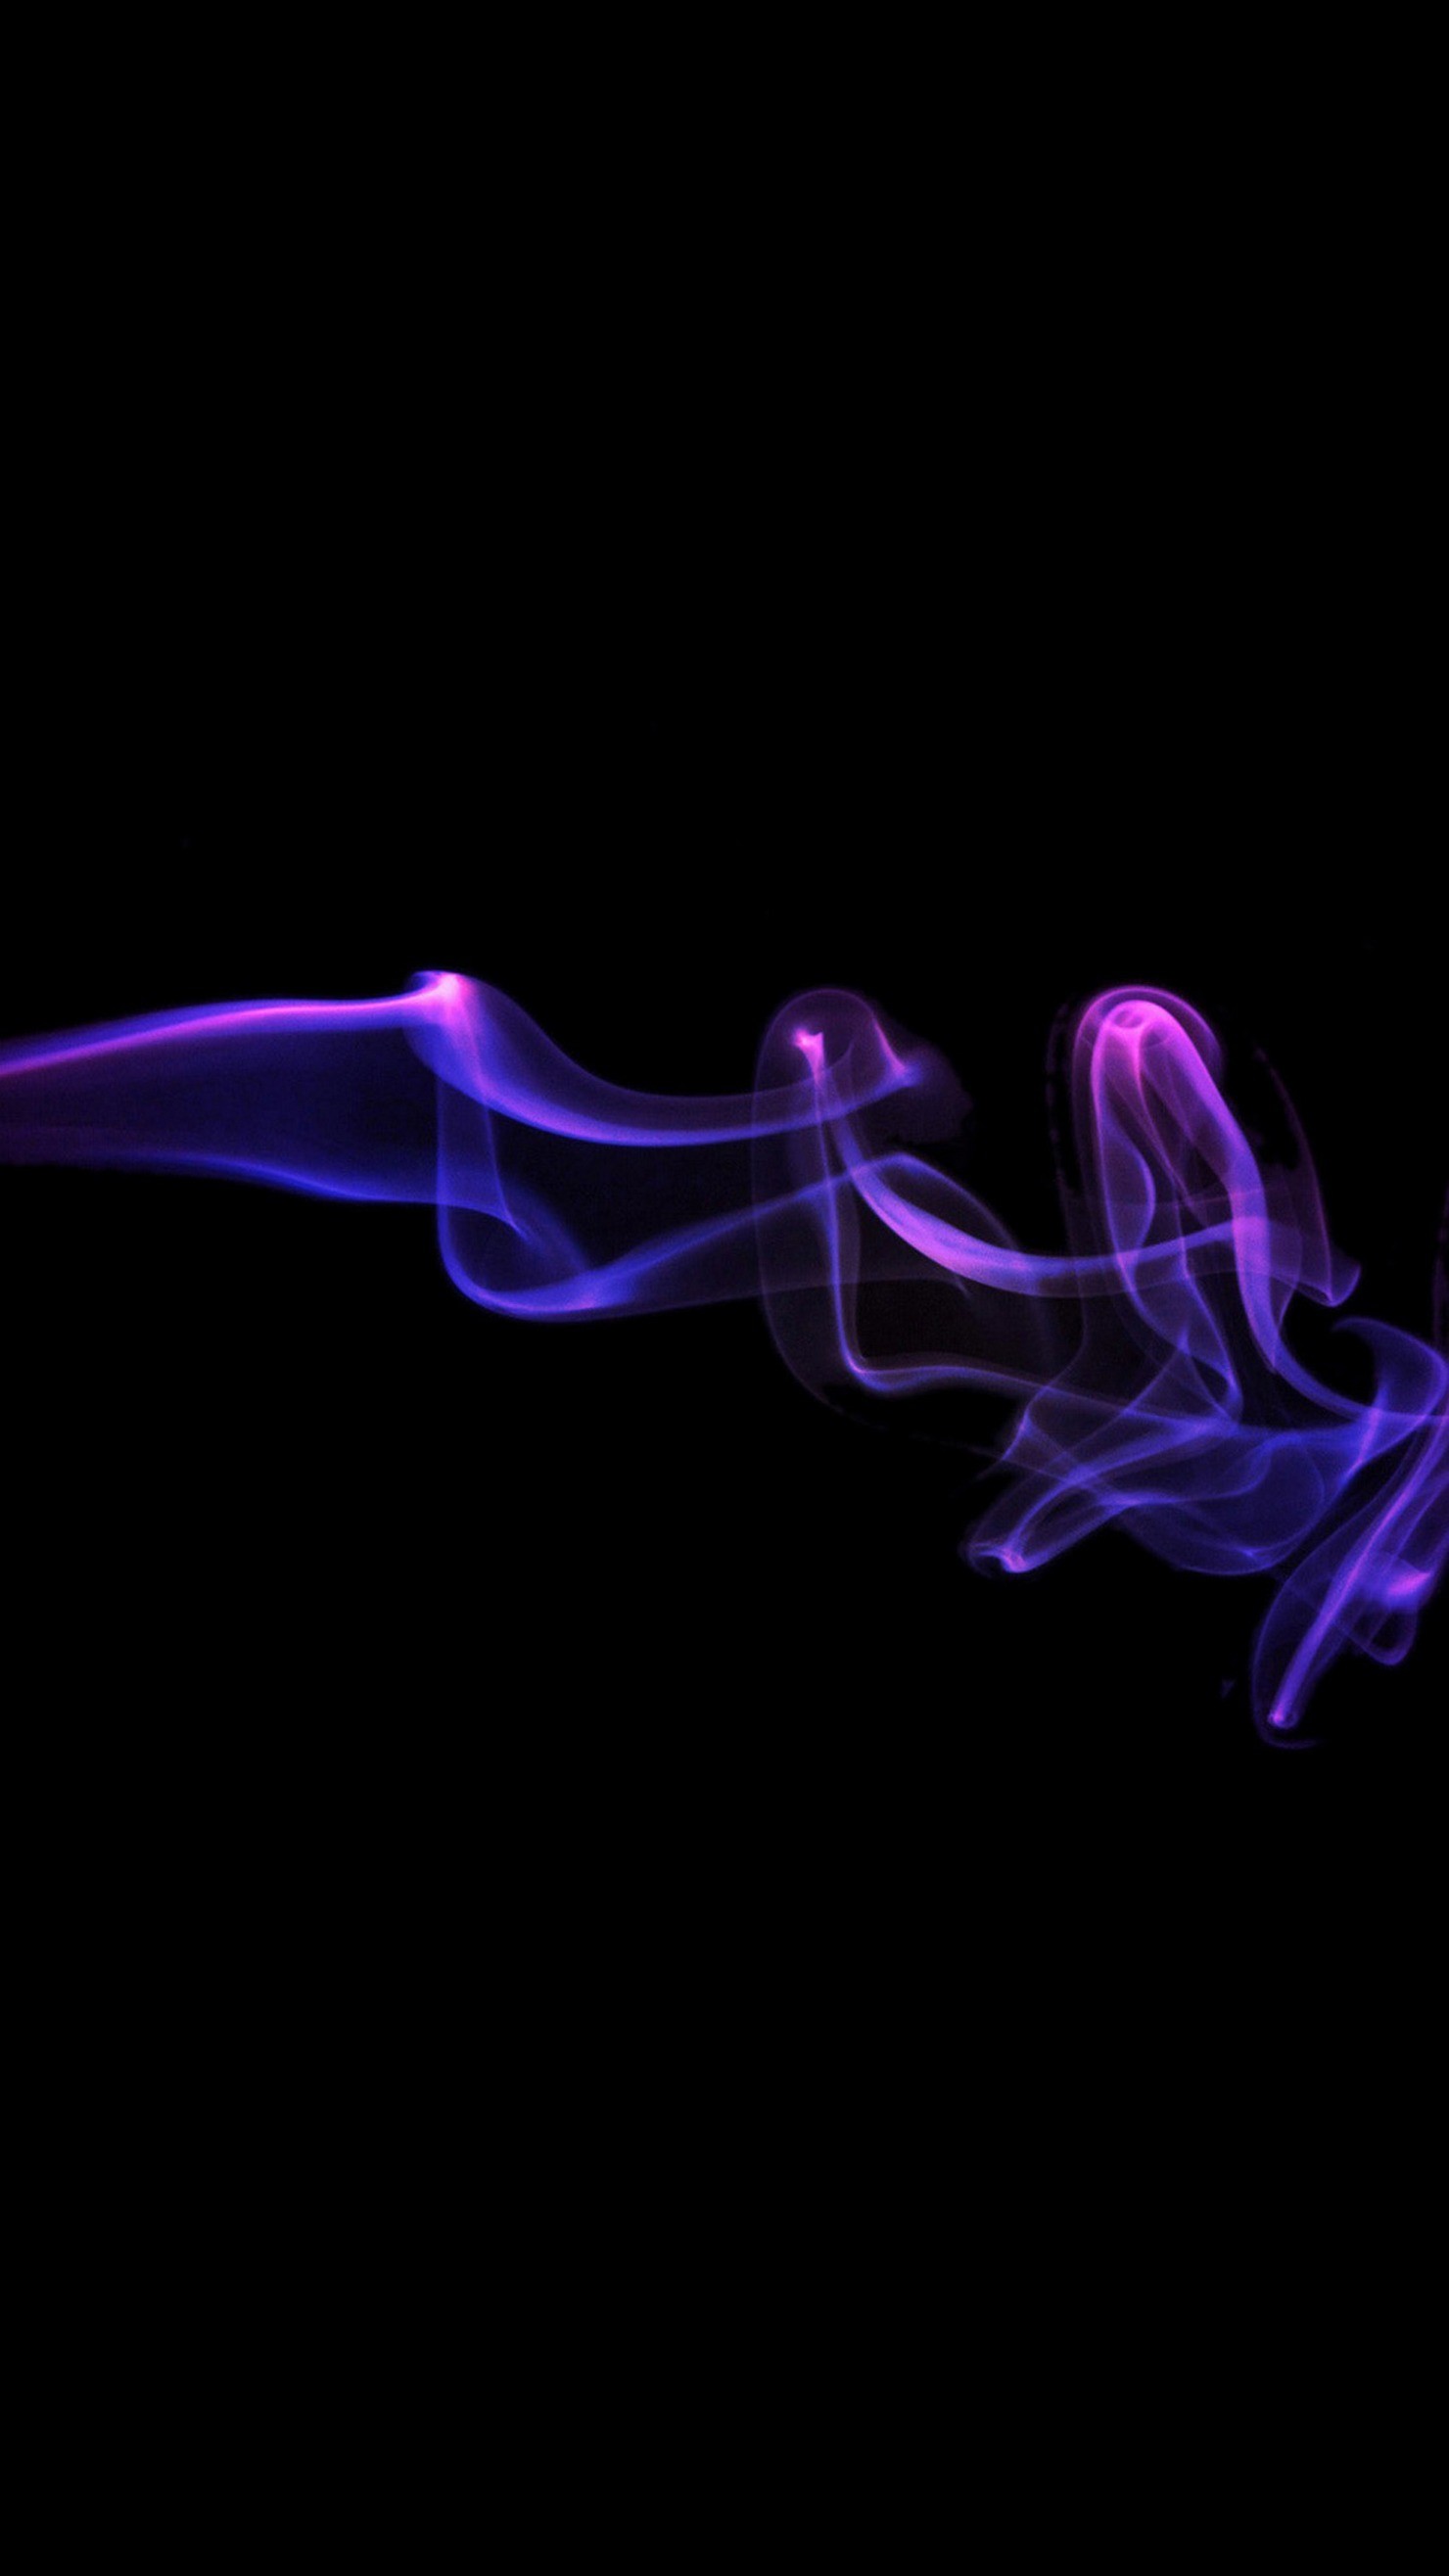 1480x2631 ... iPhone 6 Mobile HD Wallpapers ABSTRACT SMOKE BACKGROUND VIOLET BLACK .